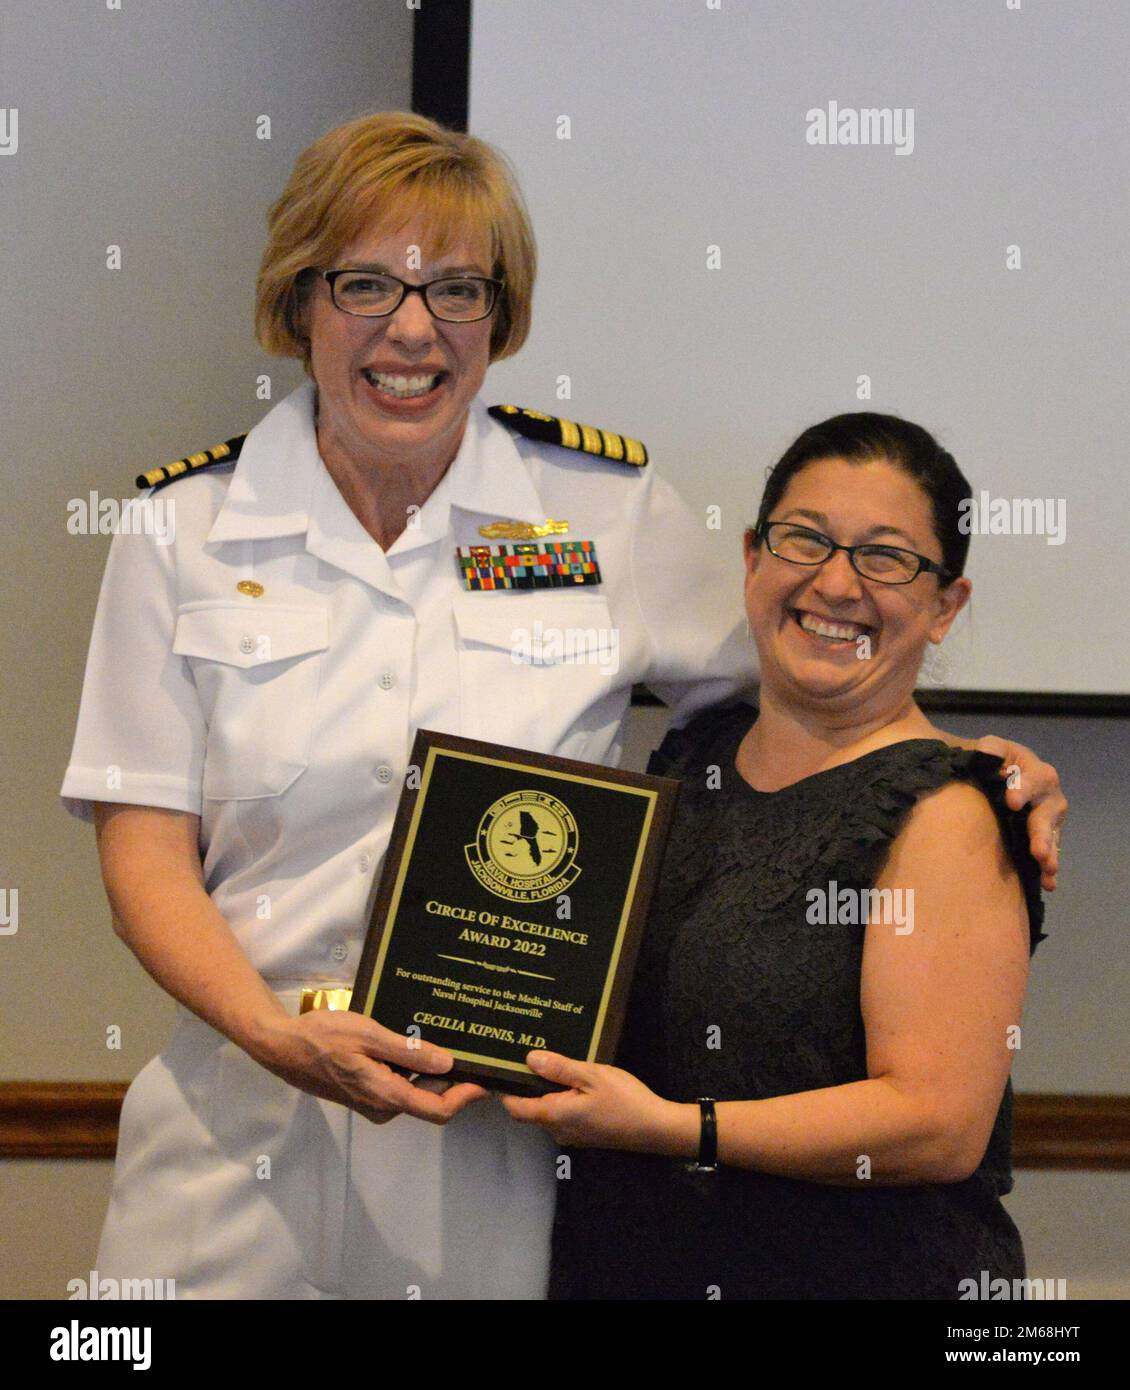 JACKSONVILLE, Fla. (April 19, 2022) – Capt. Teresa Allen, Naval Hospital Jacksonville’s commander presents the Circle of Excellence Award to Cecilia Kipnis, associate program director of NH Jacksonville’s family medicine residency program, at the Duval County Medical Society / Navy dinner at Naval Air Station Jacksonville’s Officers Club on April 19.  Founded in 1853, Duval County Medical Society was the first medical society in Florida. Stock Photo